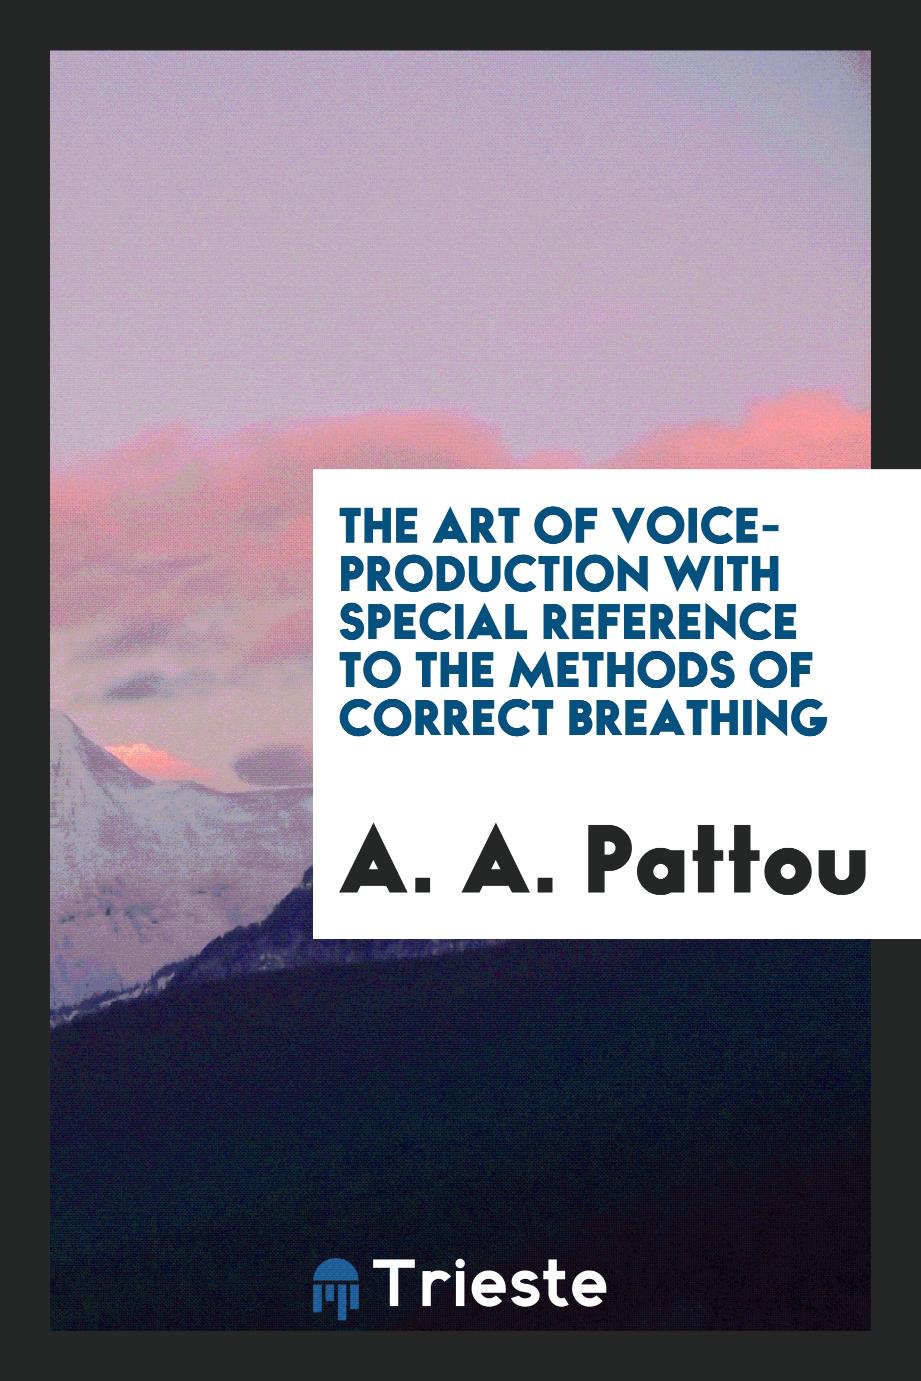 The Art of Voice-Production with Special Reference to the Methods of Correct Breathing